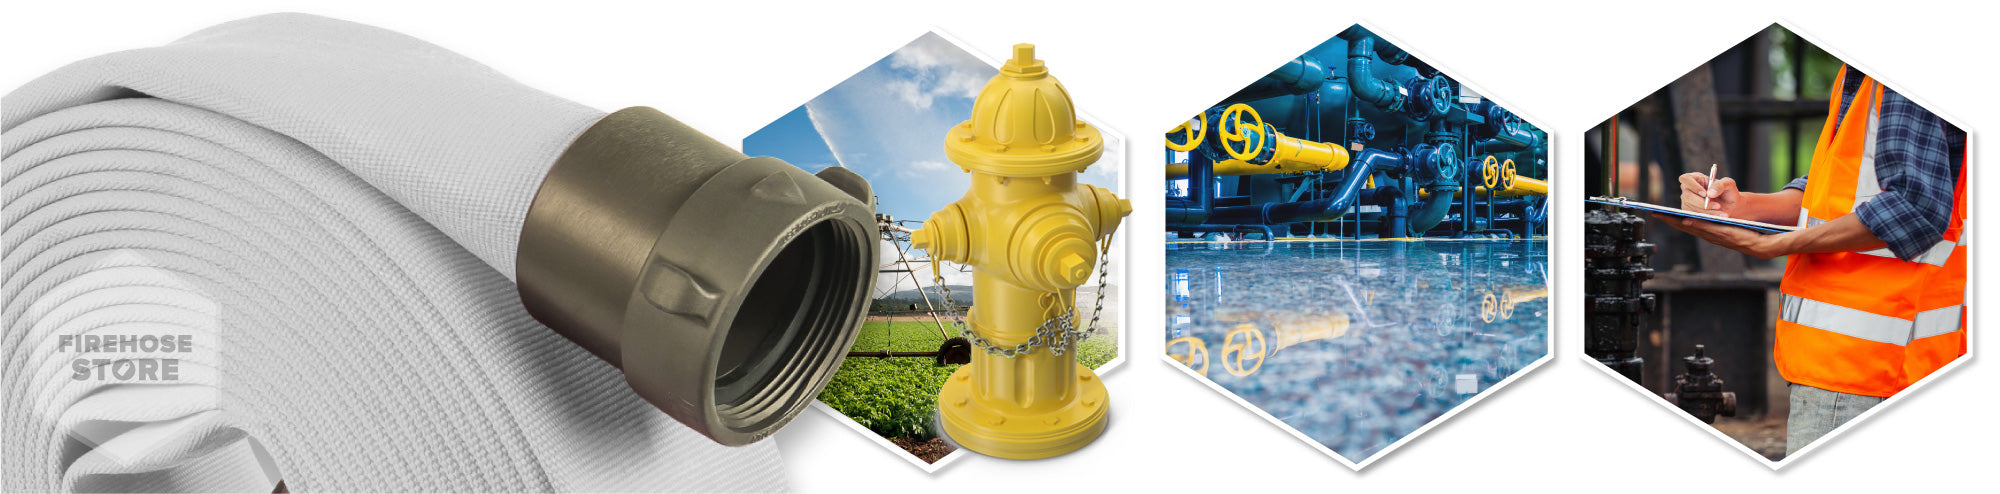 1-1-2 Inch x 25 Feet Fire Hydrant Hose Graphic Overview